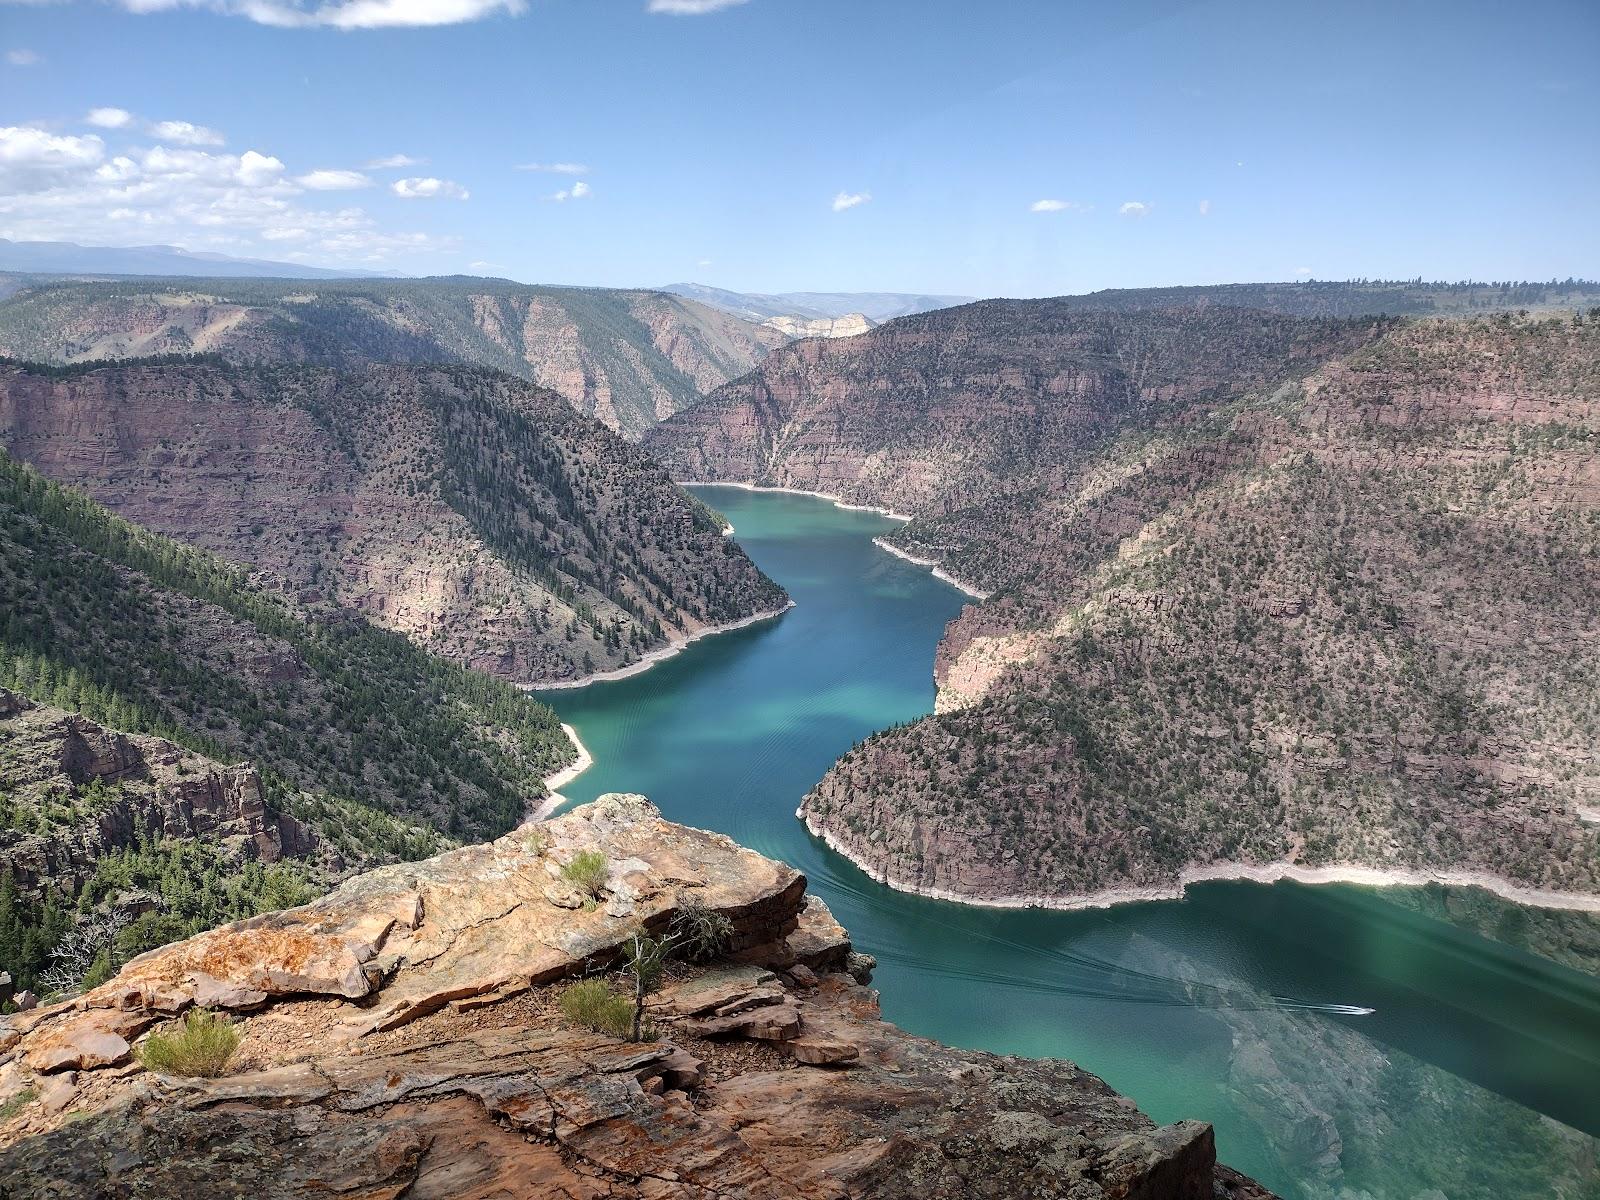 Sandee Flaming Gorge National Recreation Area Photo